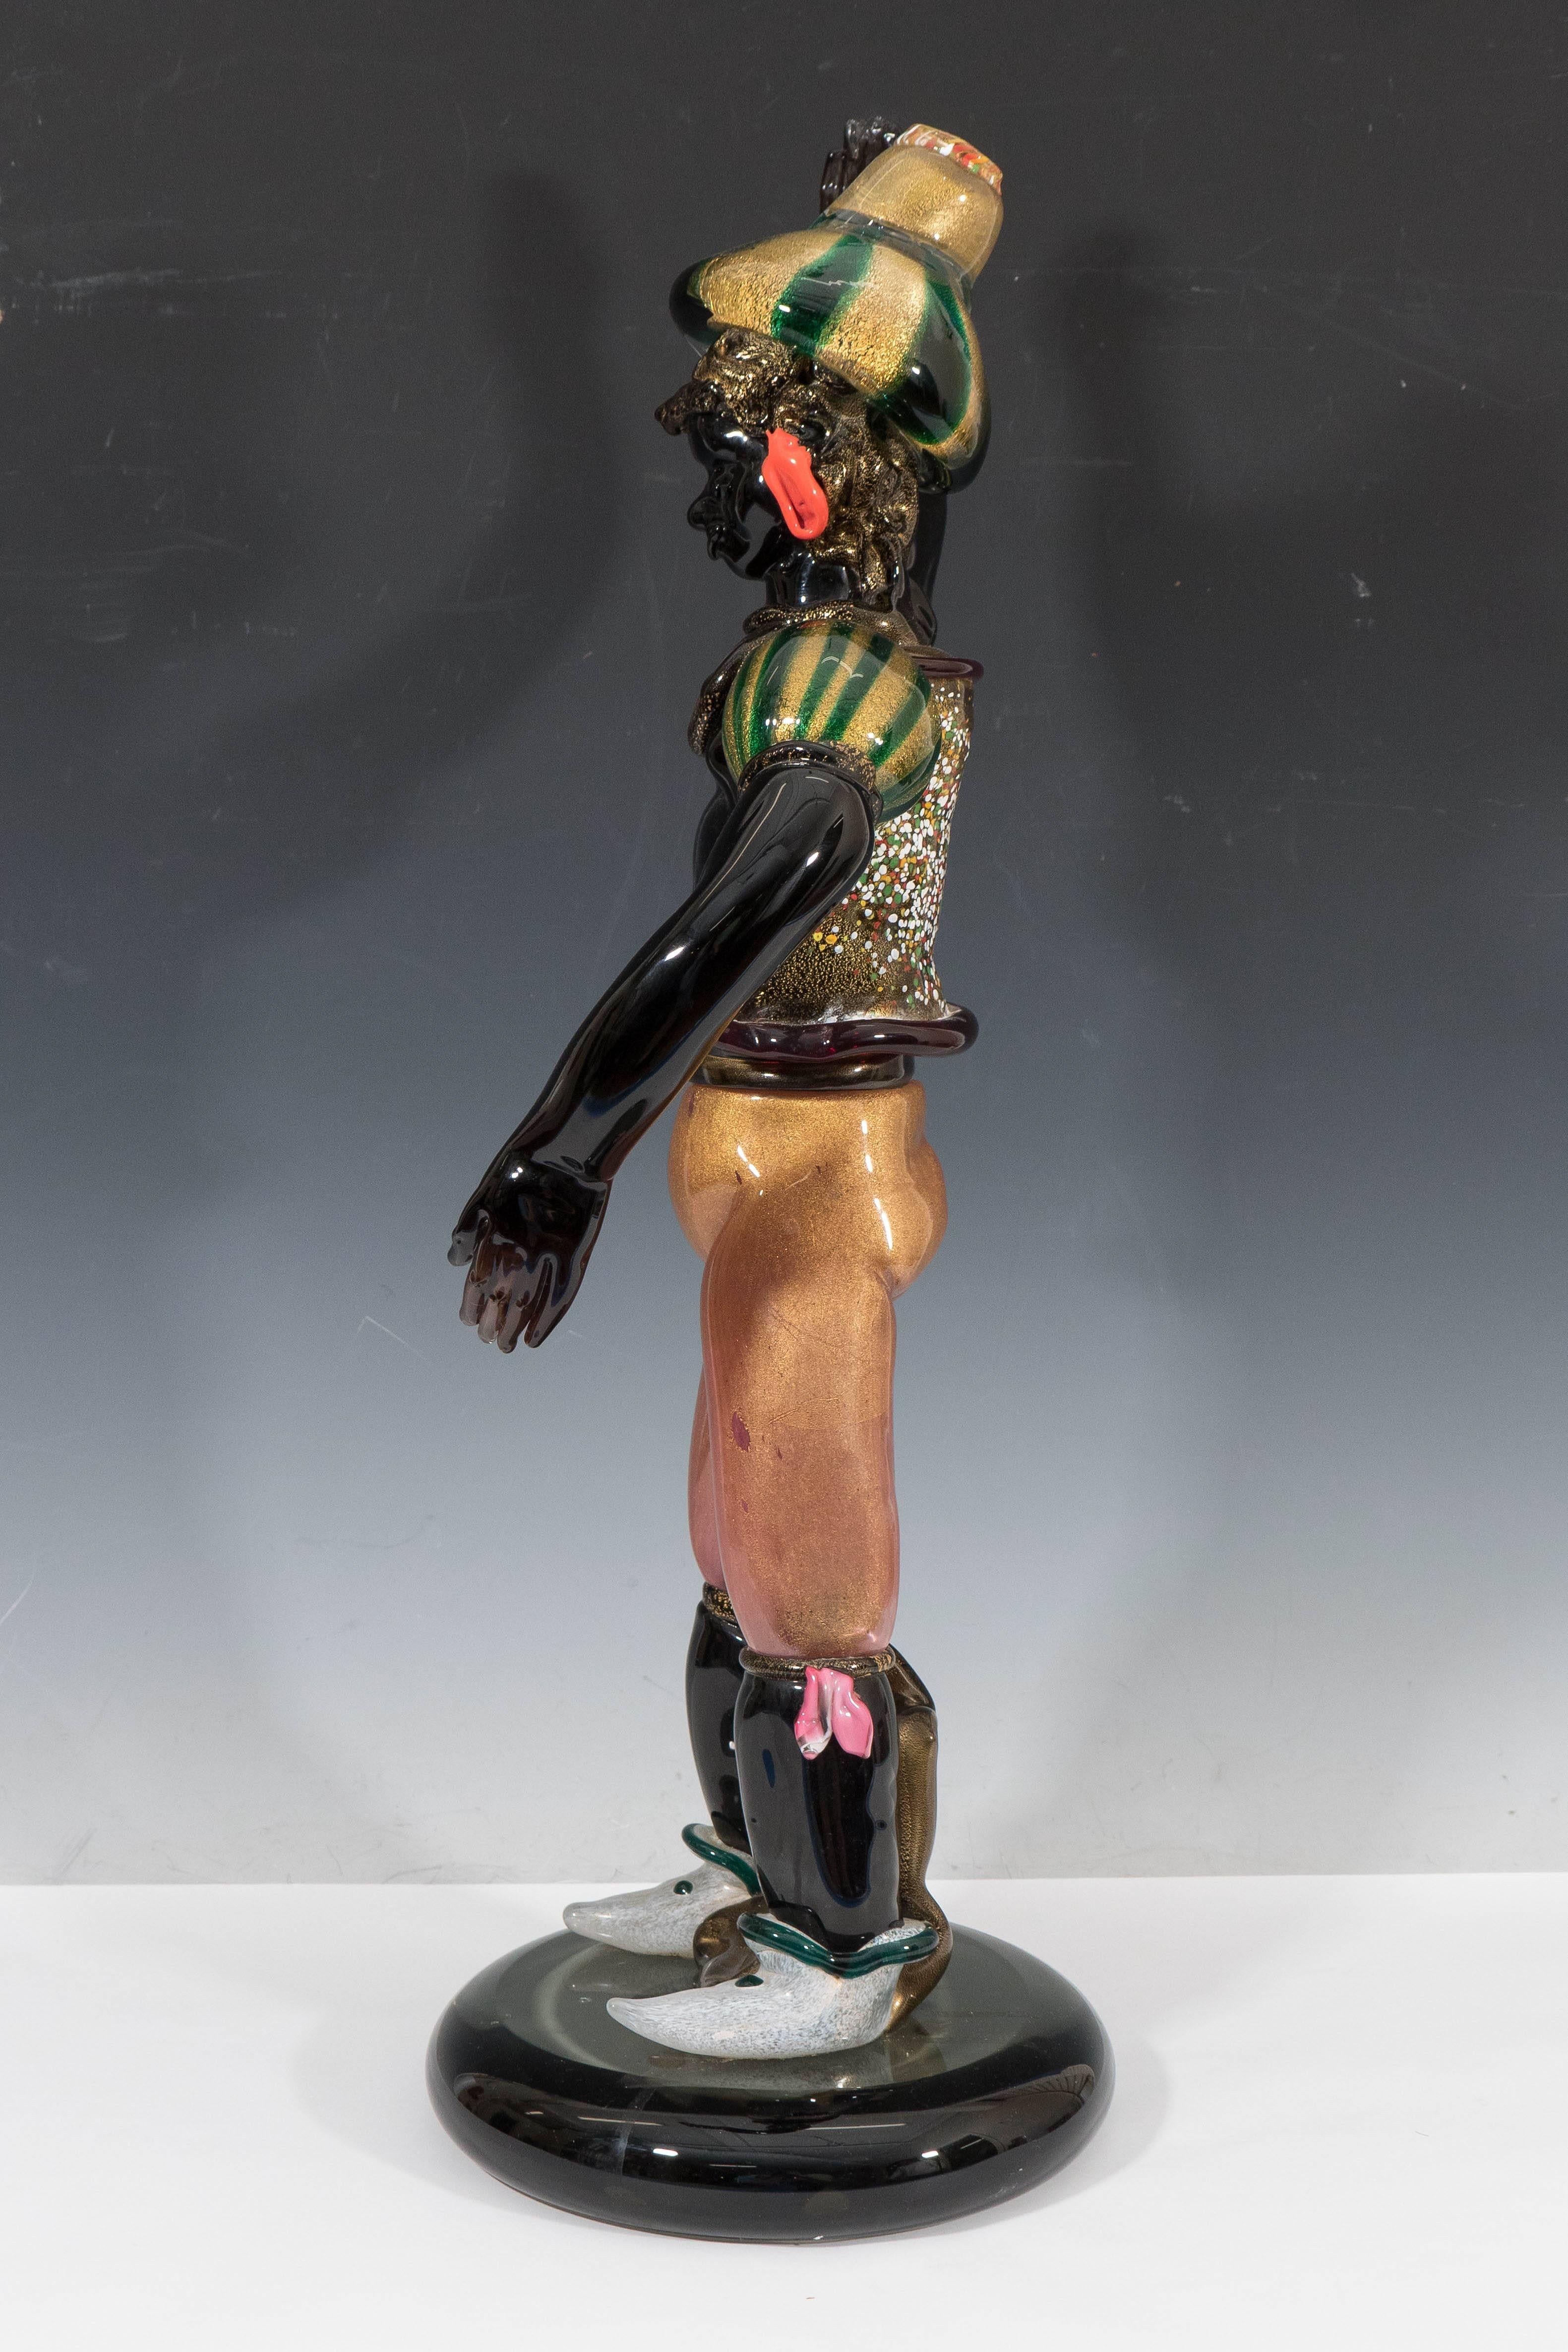 20th Century A Vintage Murano Glass Sculpture of Dancer in a Turban by Gino Cenedese 